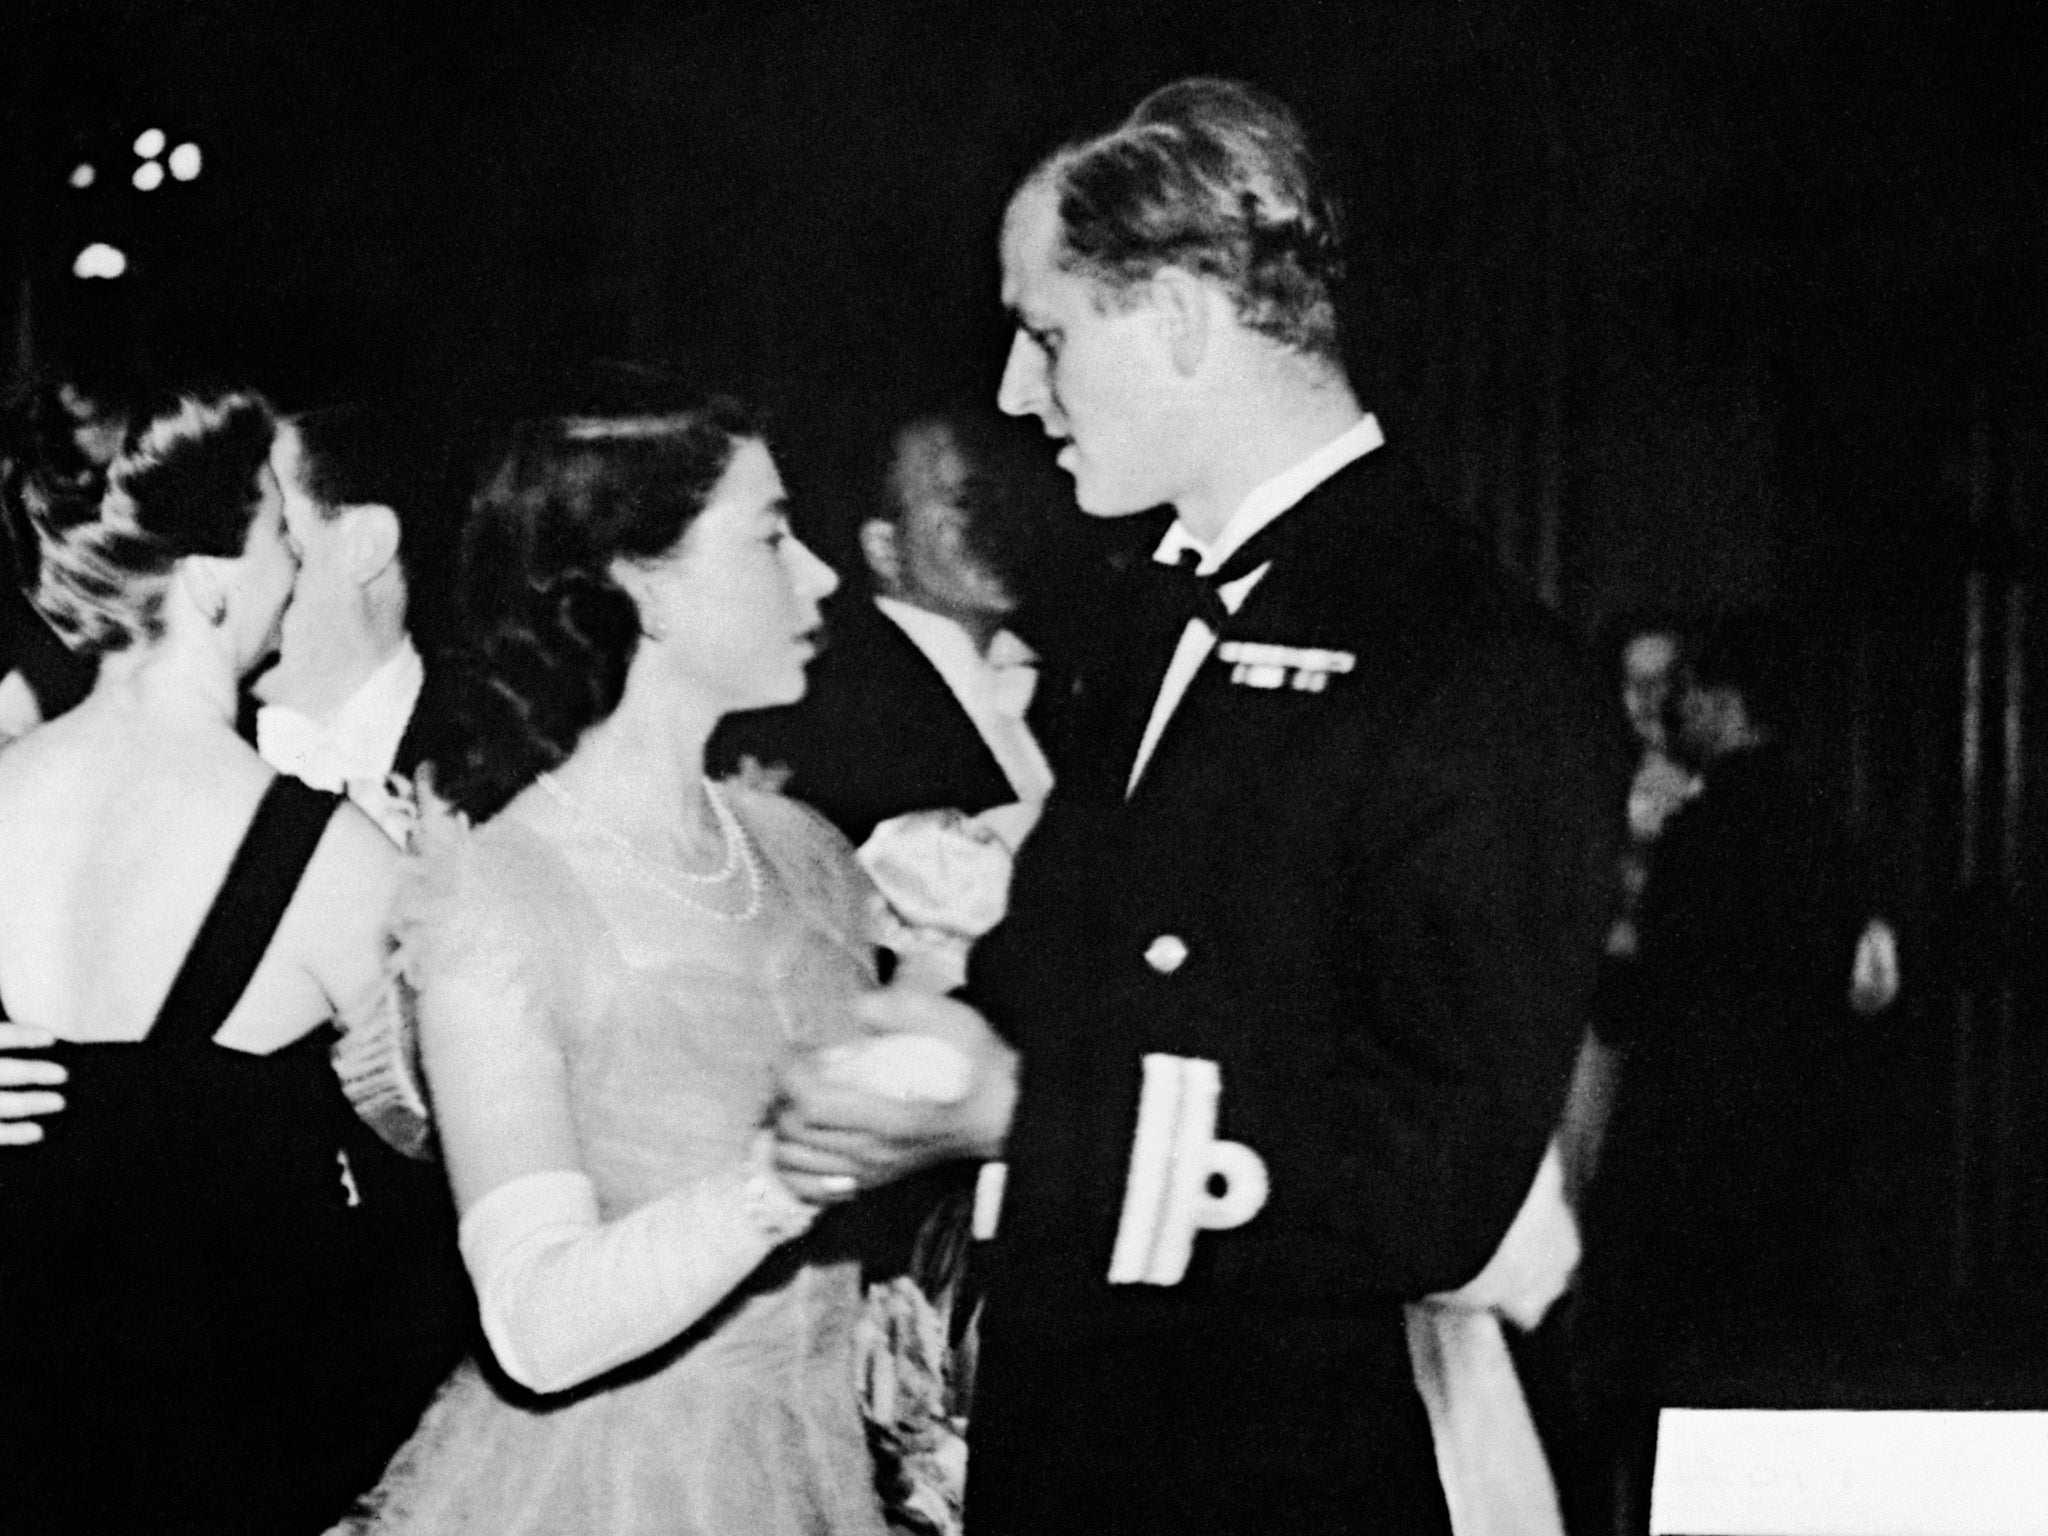 Dancing with her then-fiance, Philip Mountbatten, at the Assembly Rooms, Edinburgh